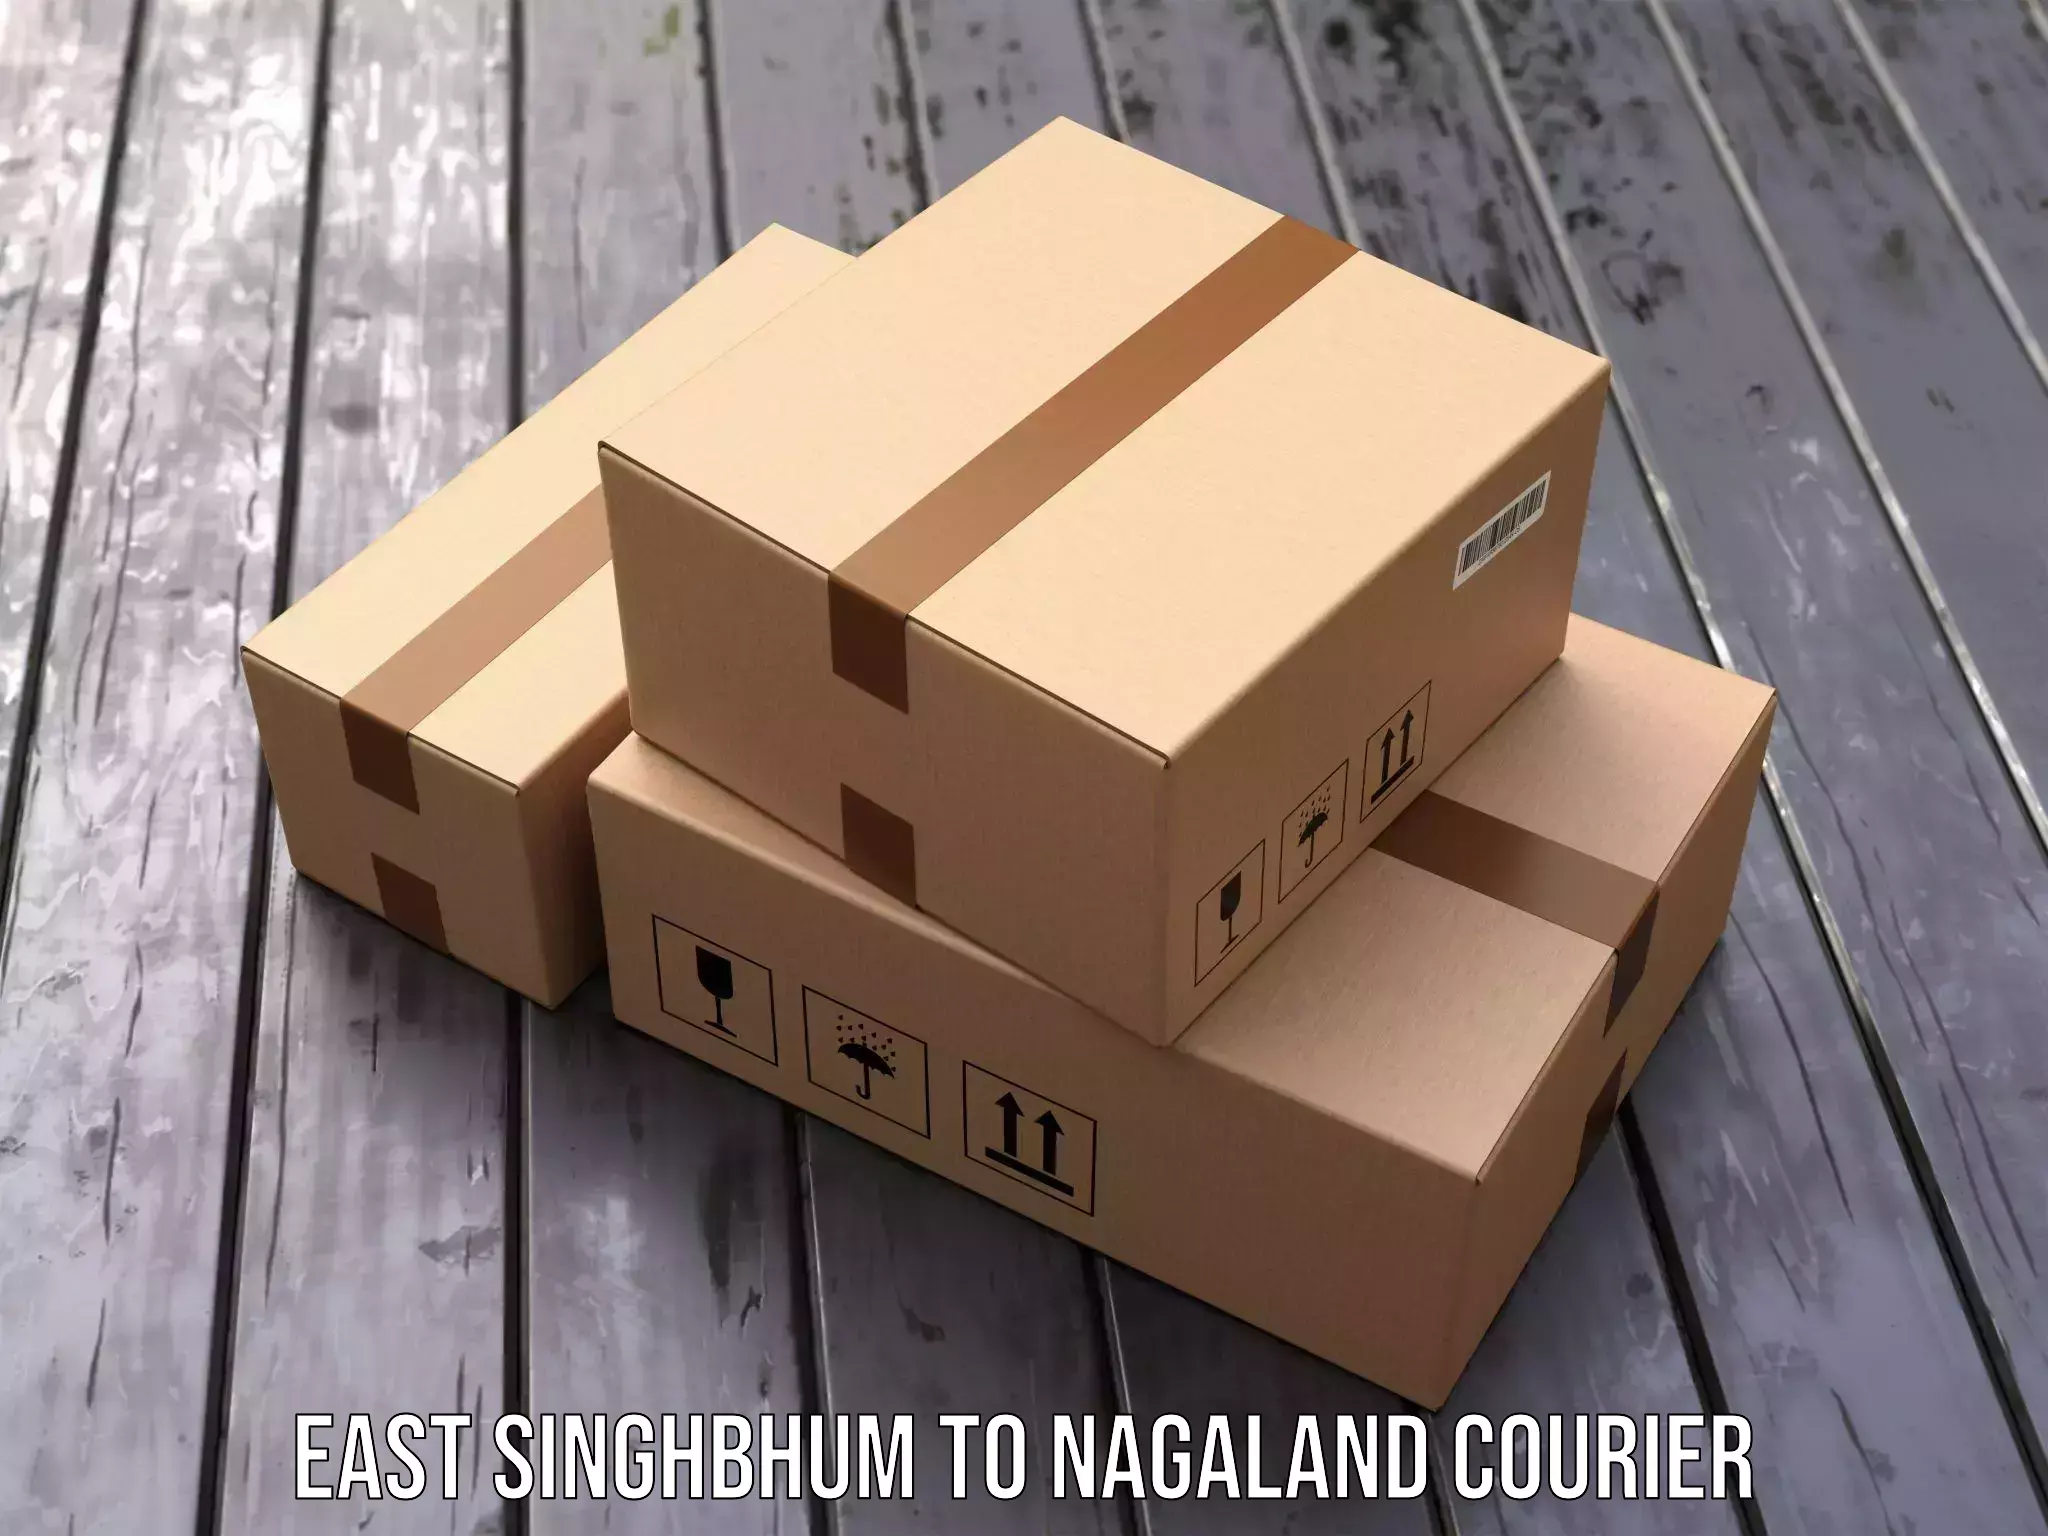 On-call courier service East Singhbhum to Chumukedima